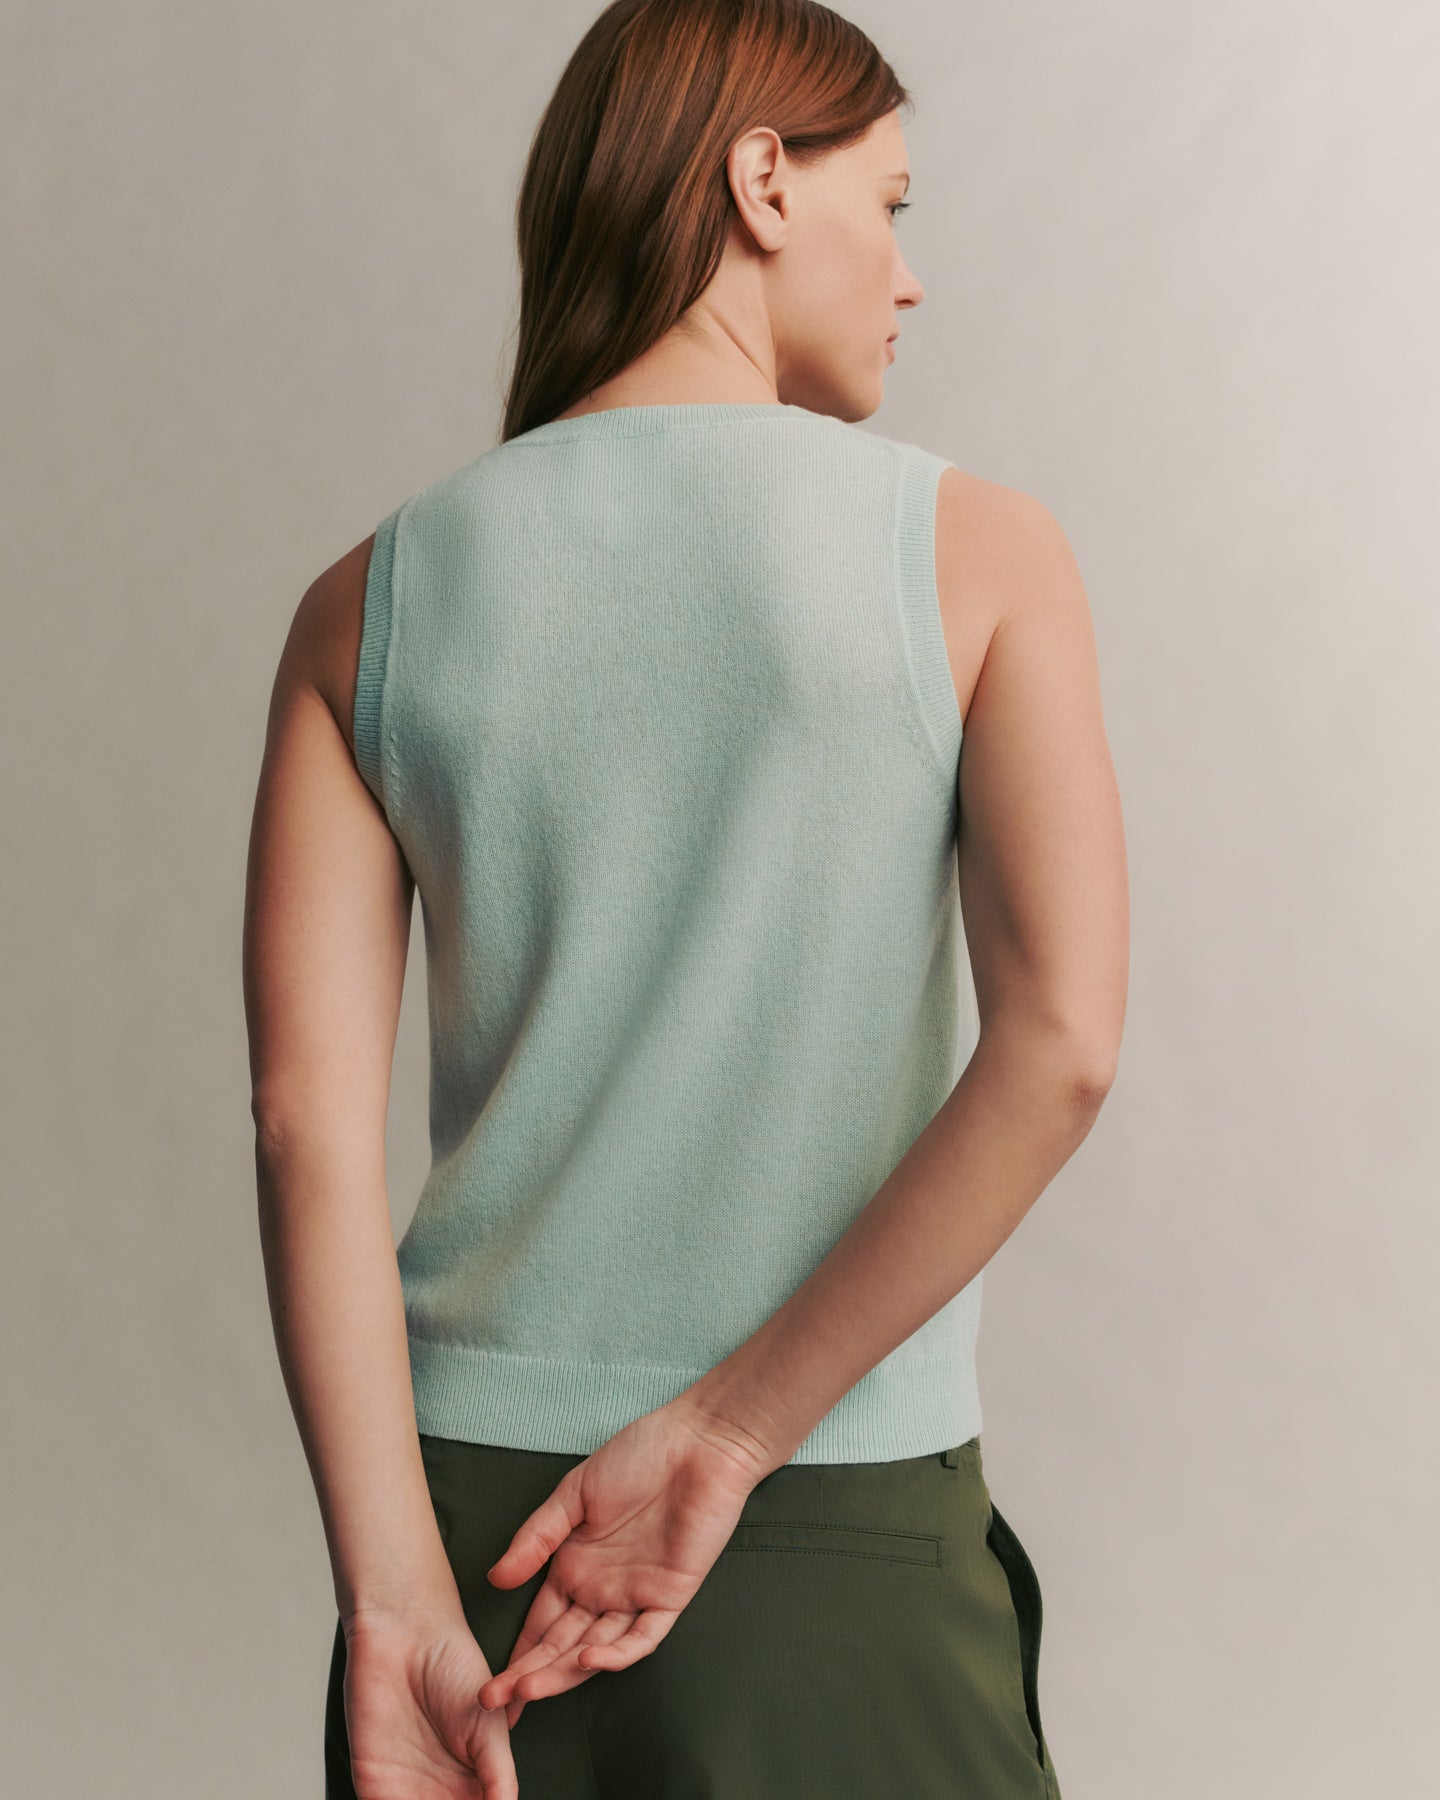 TWP Pale aqua Jenny's Tank in Cashmere view 5